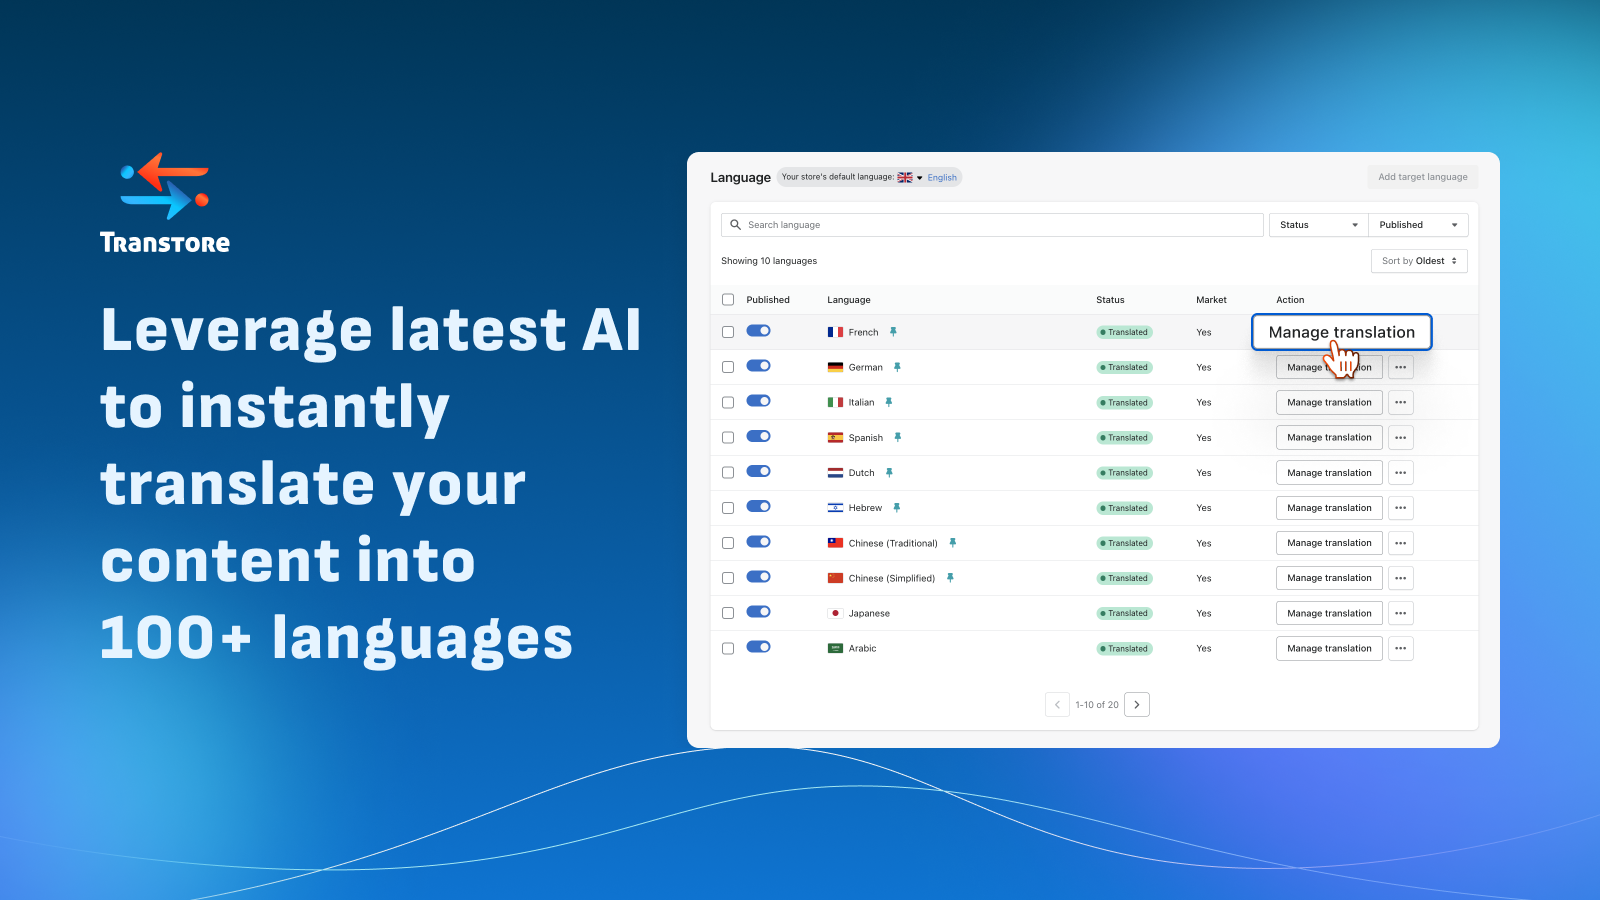 Leverage latest AI to translate content into 100+ languages